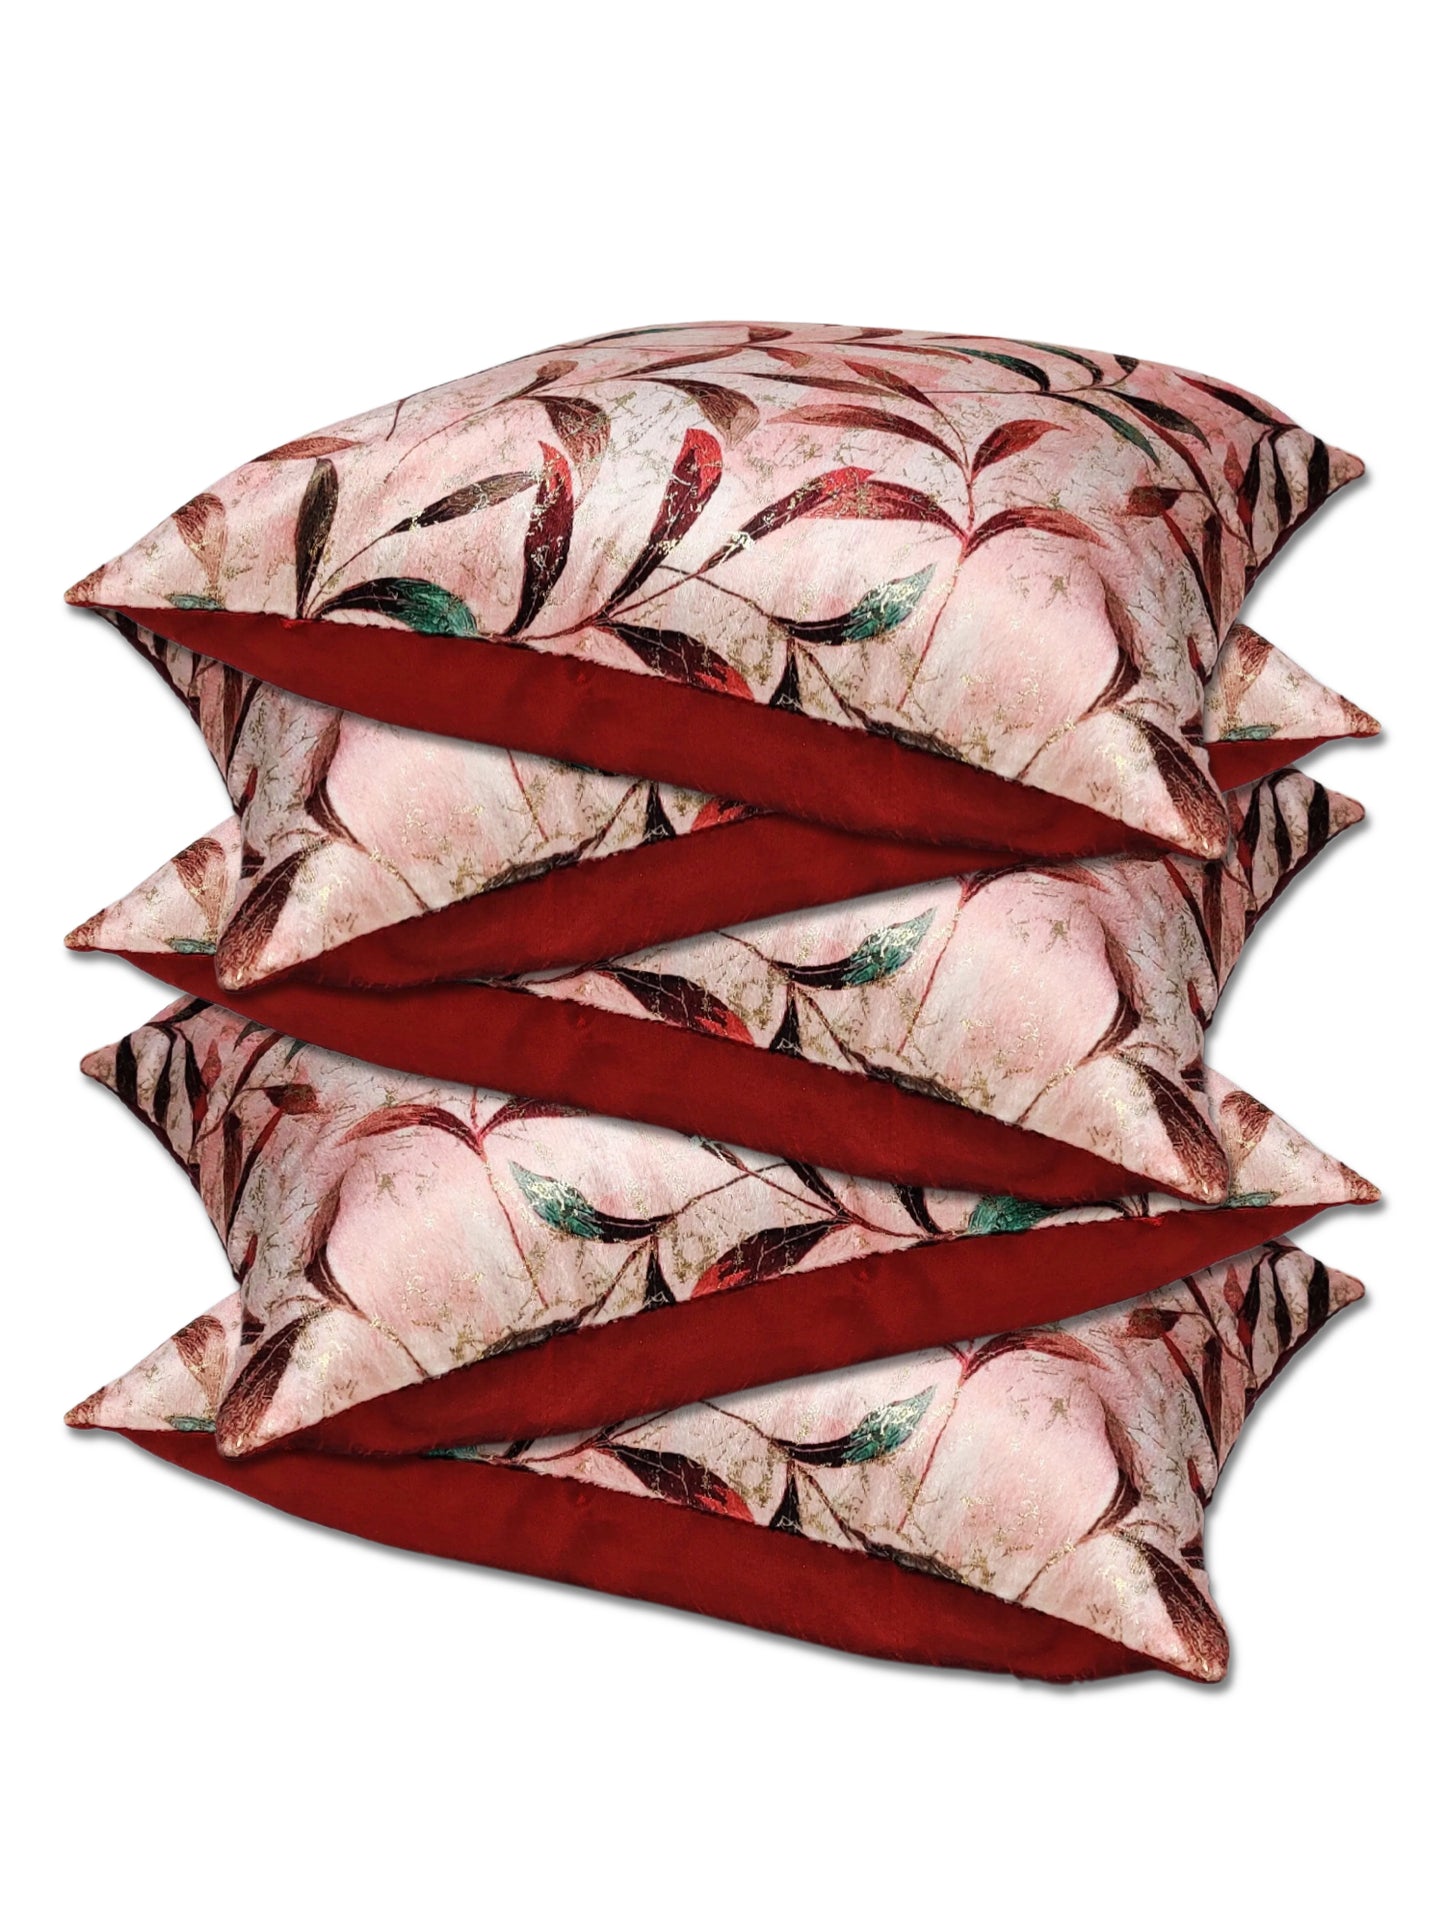 ARTSY® Red Velvet Cushion Cover Set - Pack of 5: Luxurious Home Decor Accent for Elegant Living Spaces